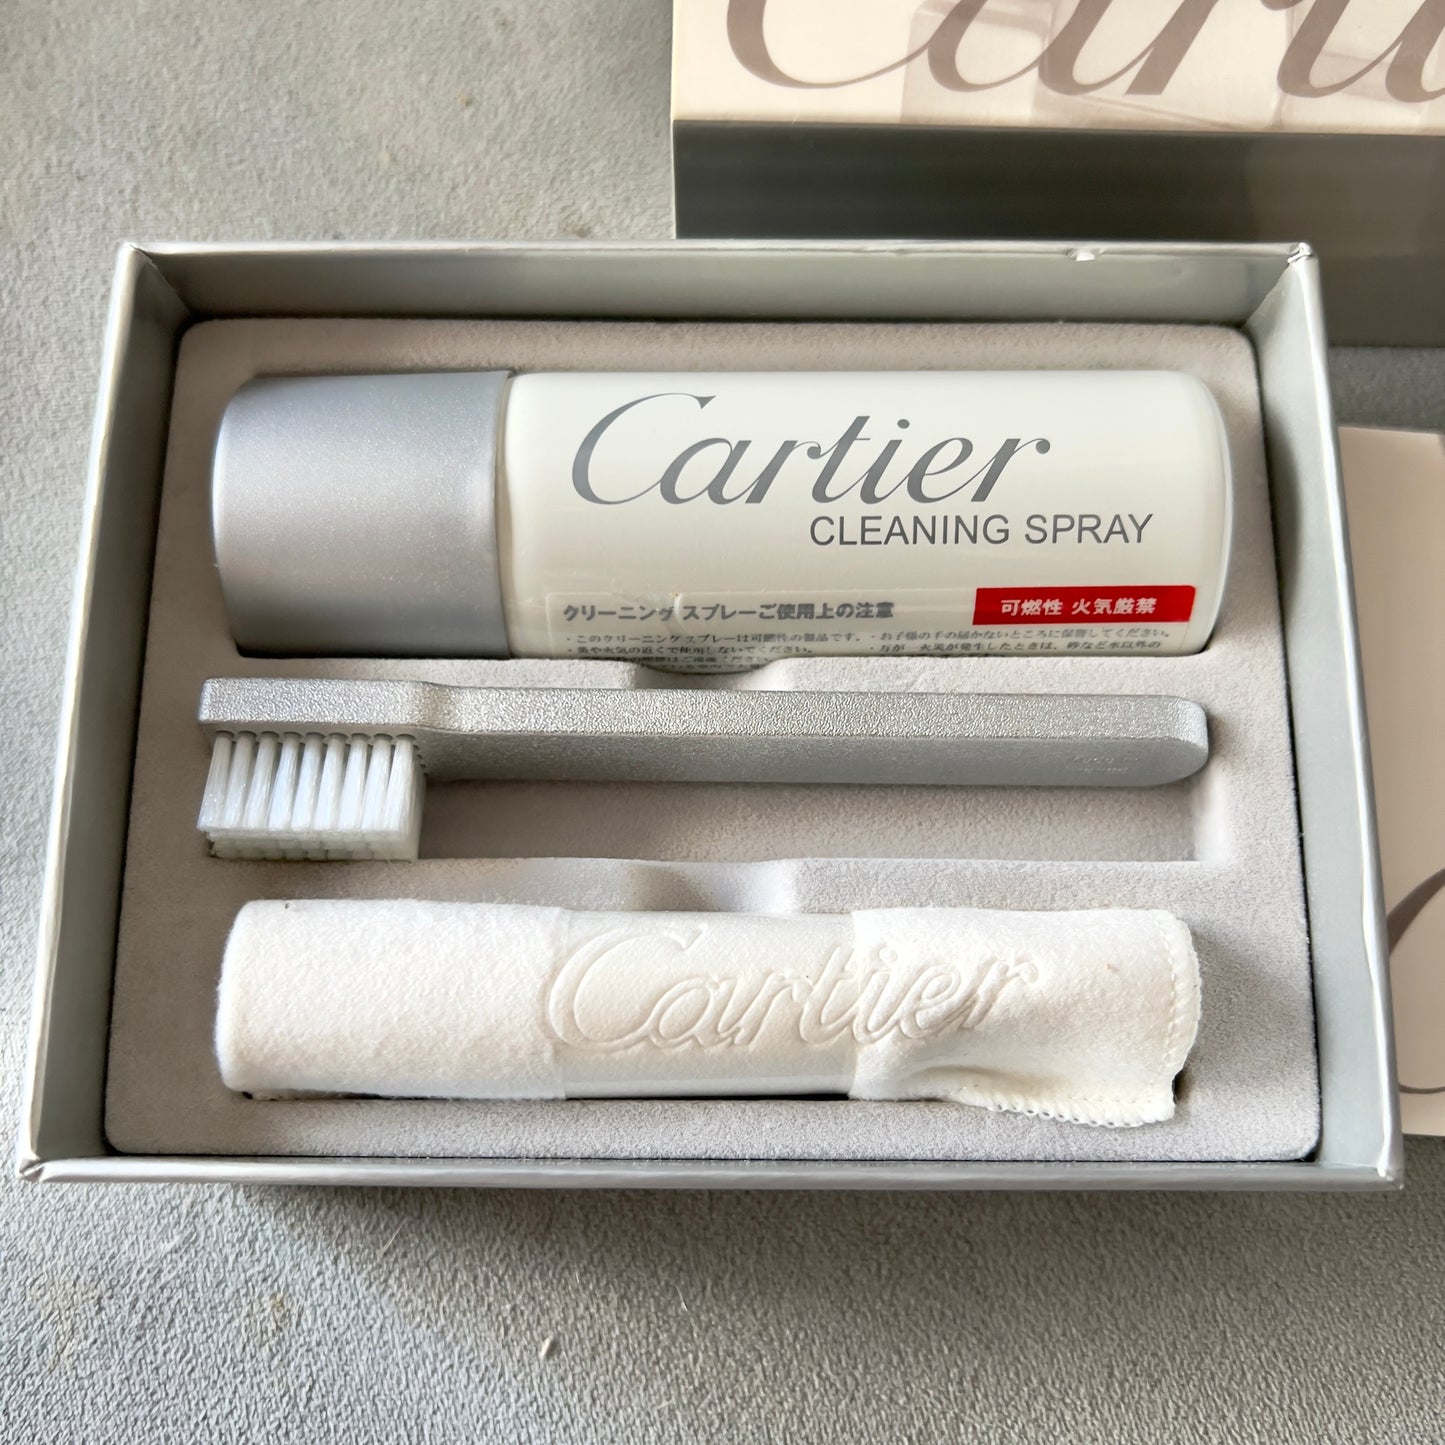 CARTIER Cleaning Kit 5.10x3.90x1.60 inches